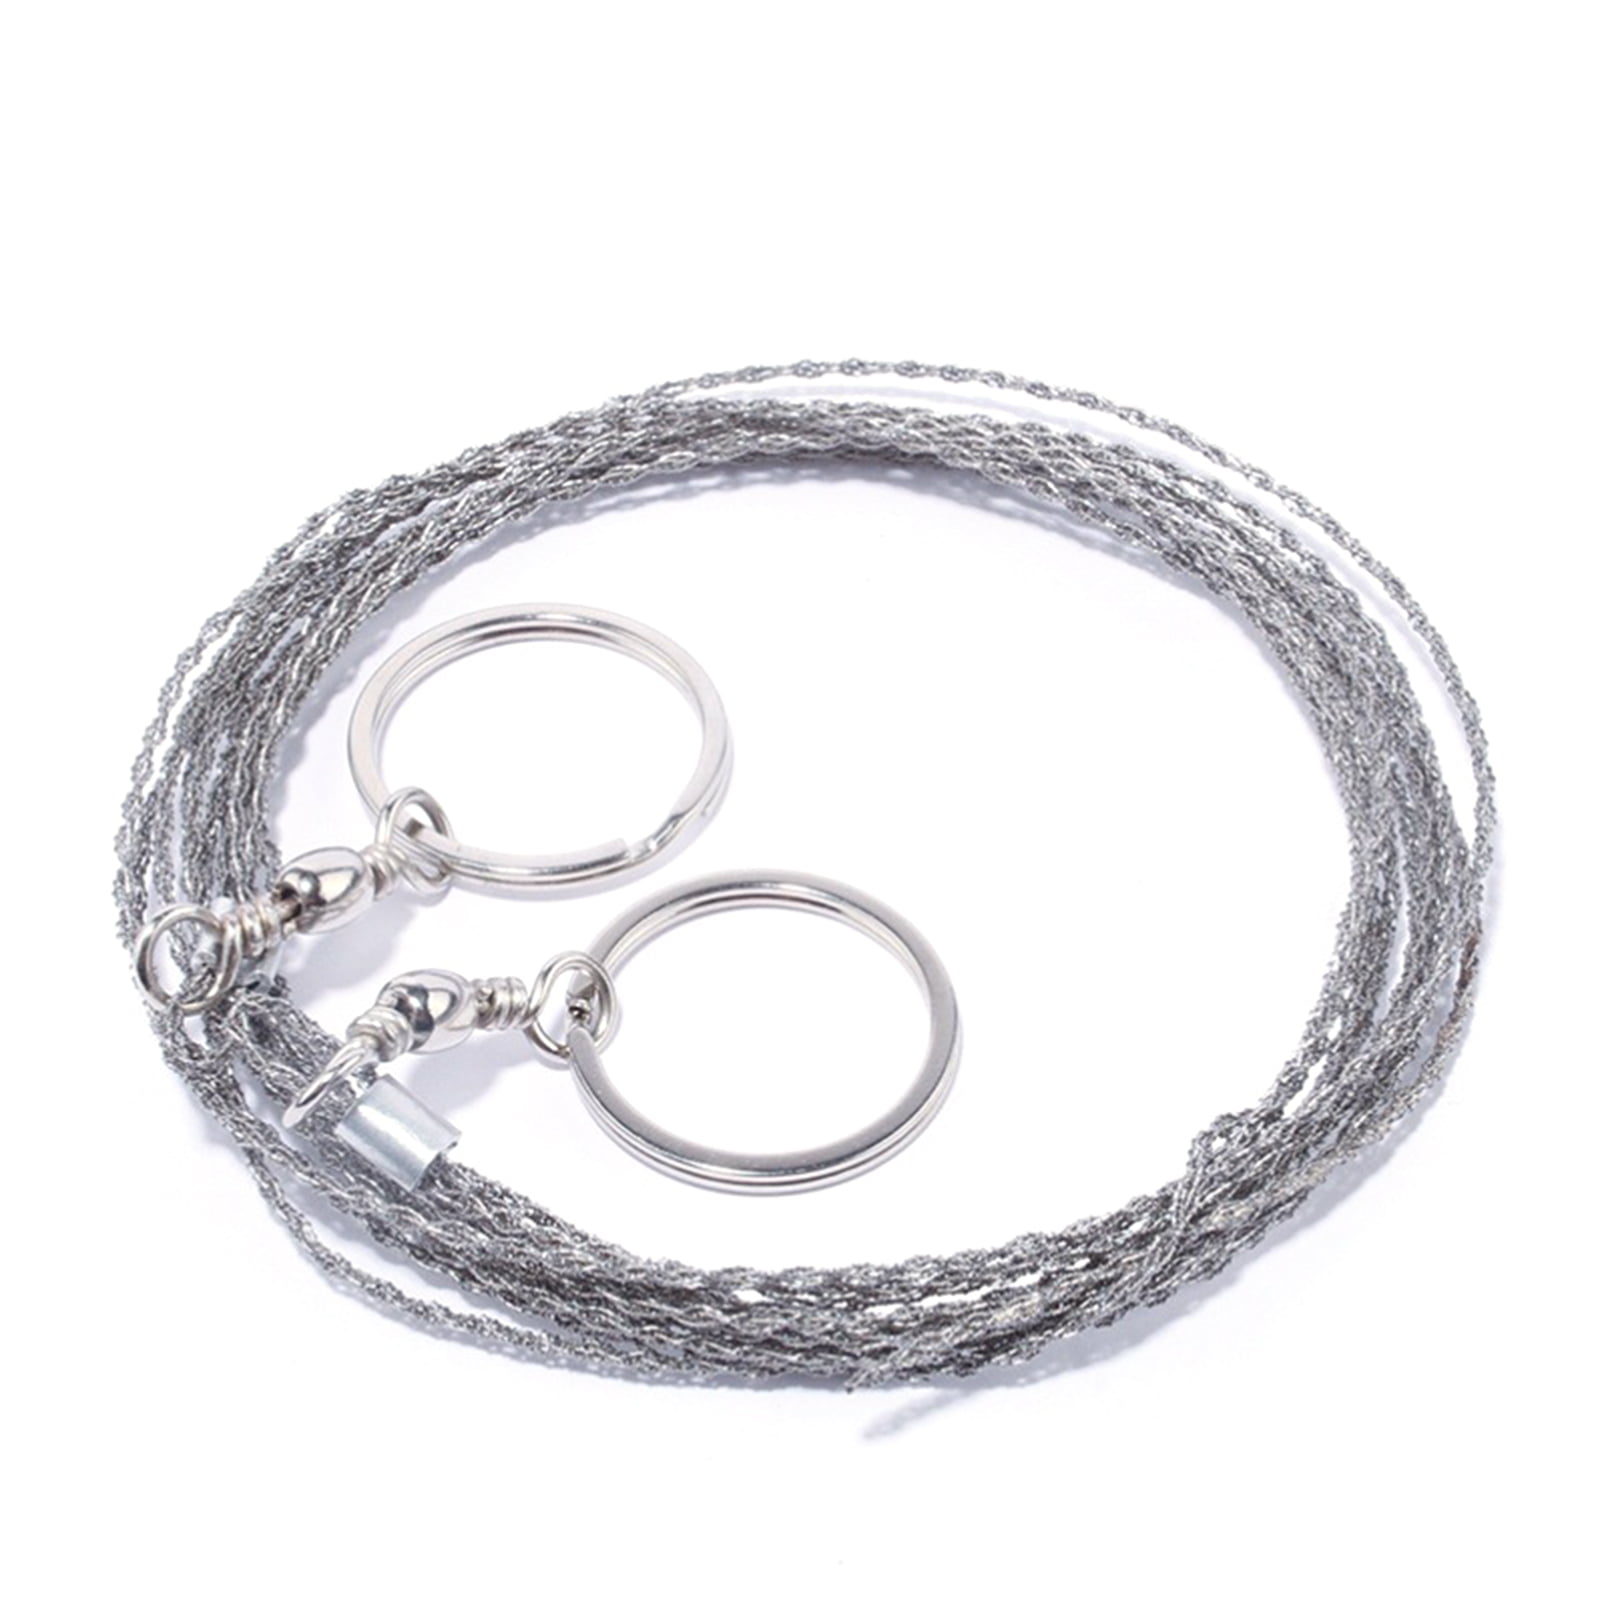 Outdoor Hand-Dn Rope Saw 304 Stainless Steel Wire Saw Camping Life-Saving Wo n2y